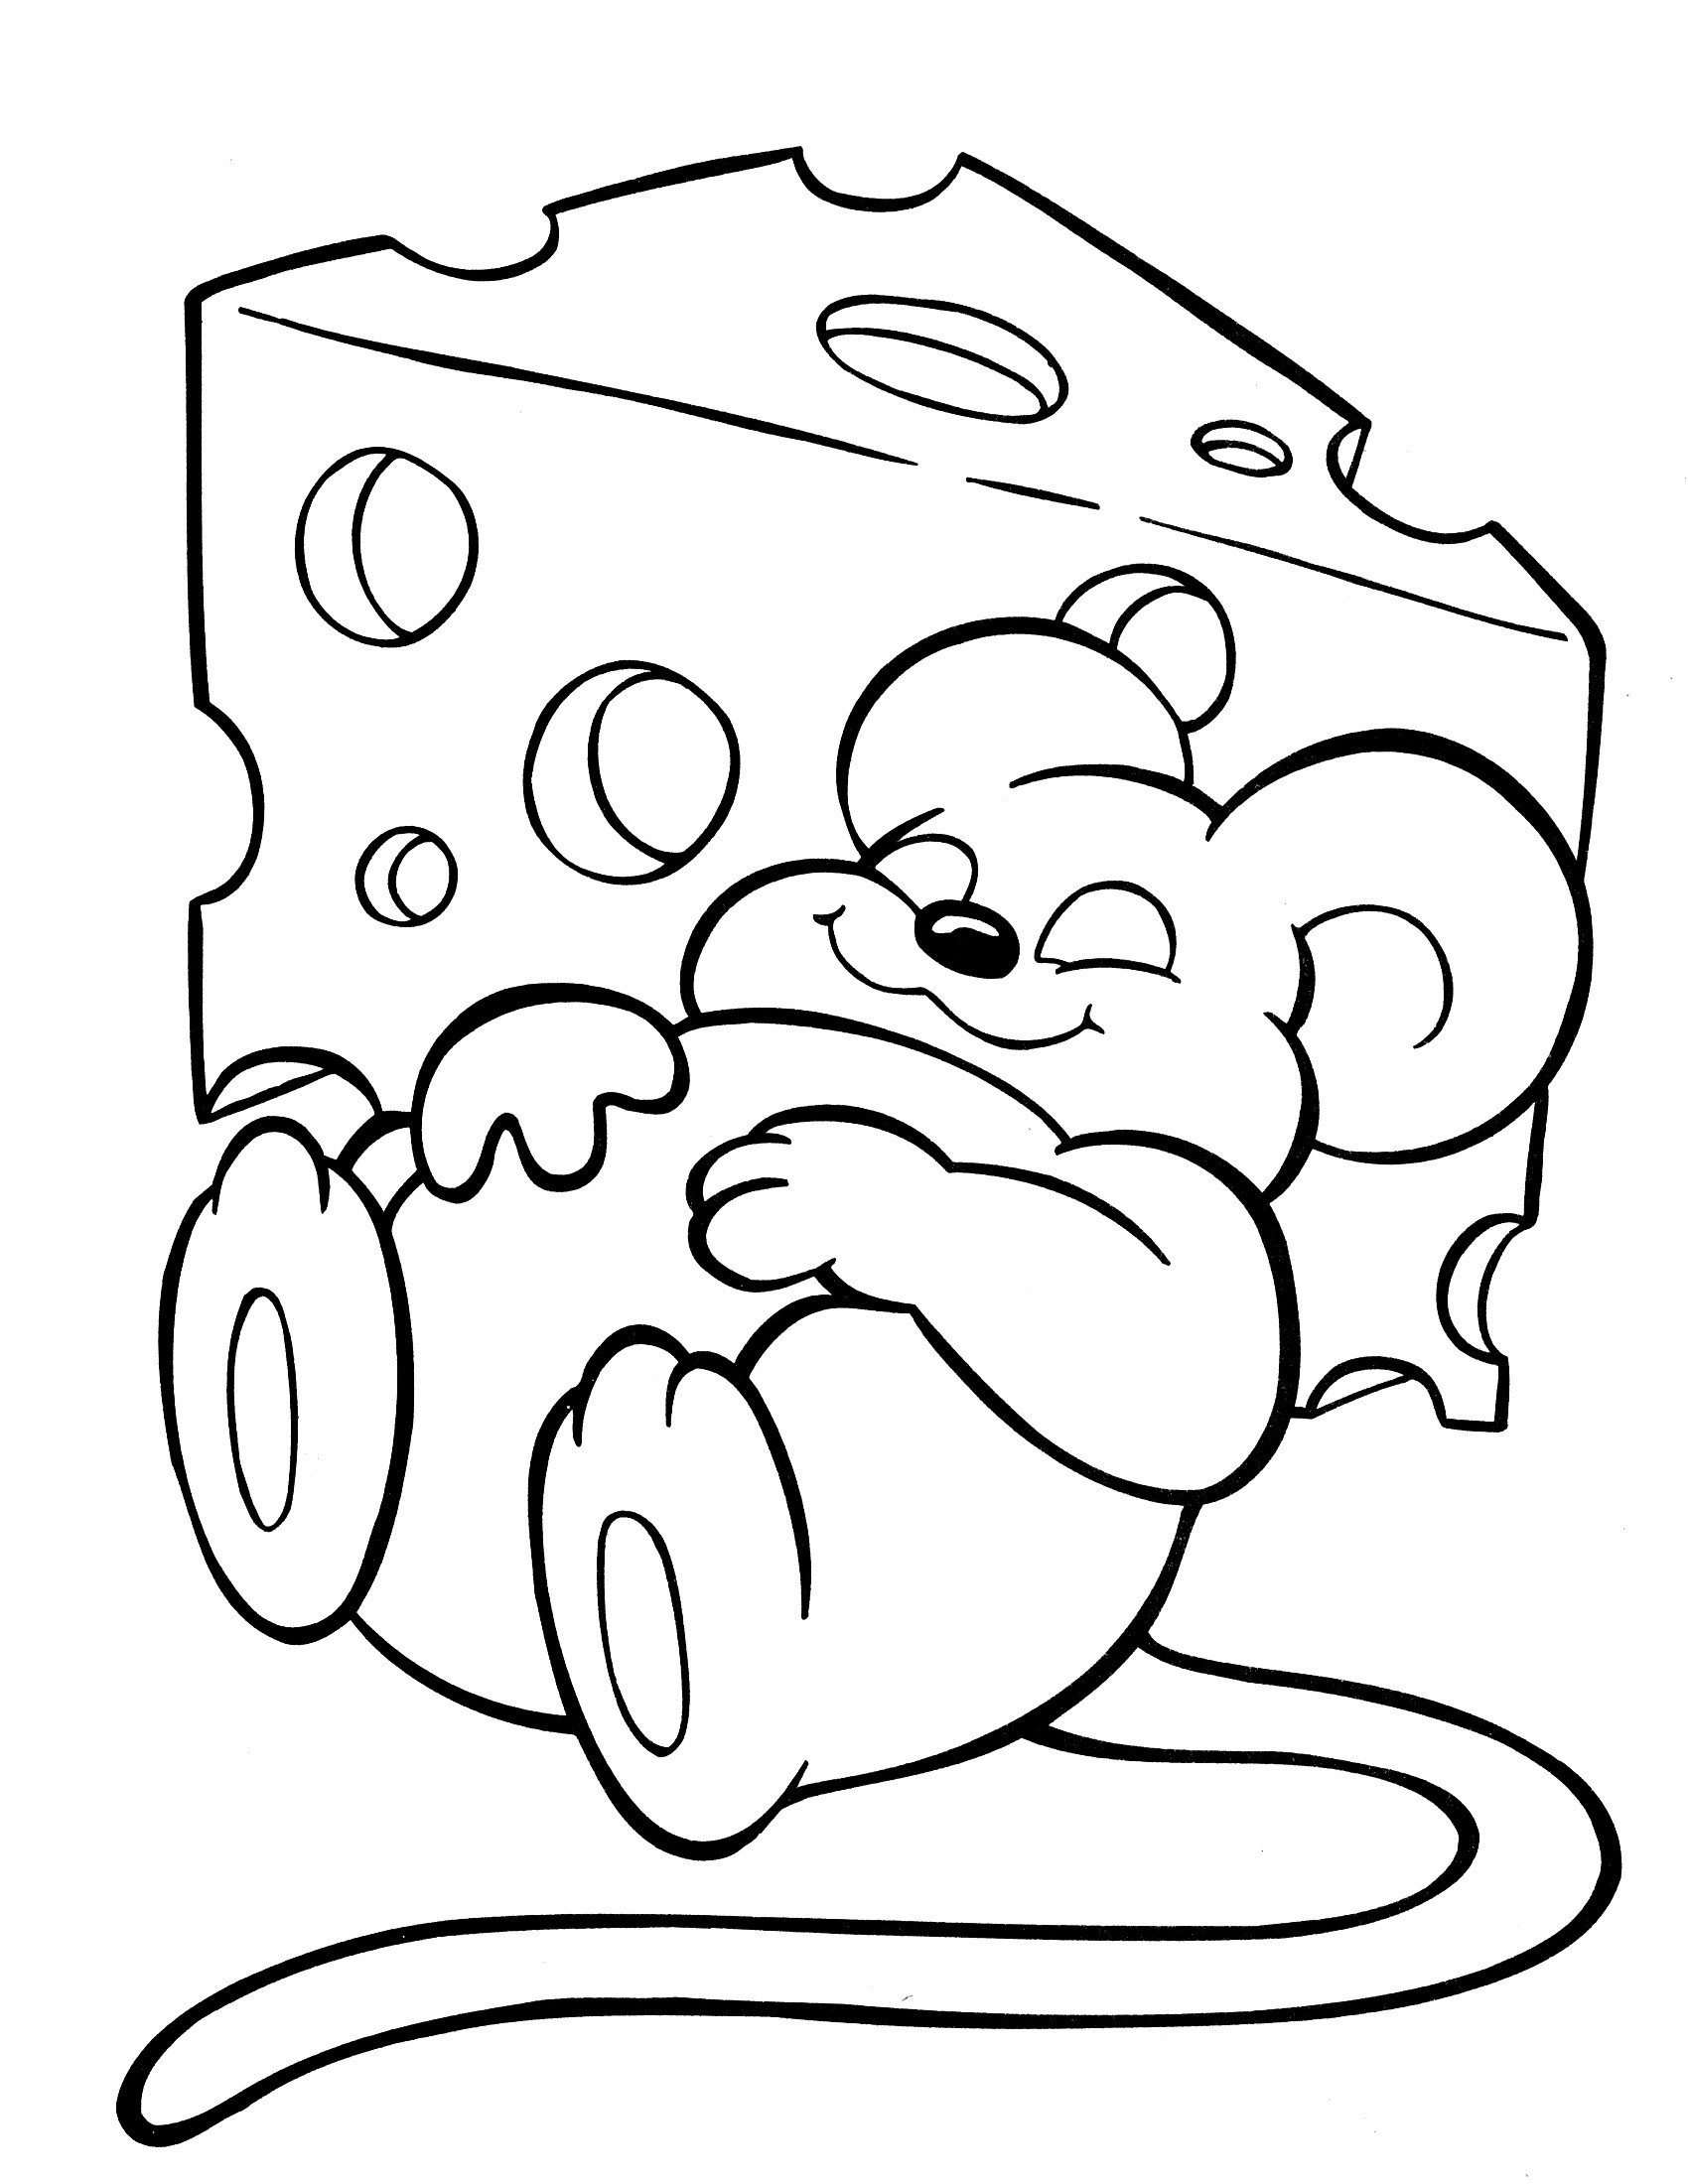 Giant Coloring Pages For Adults Iron Giant Coloring Pages New Confidential Giant Coloring Pages For